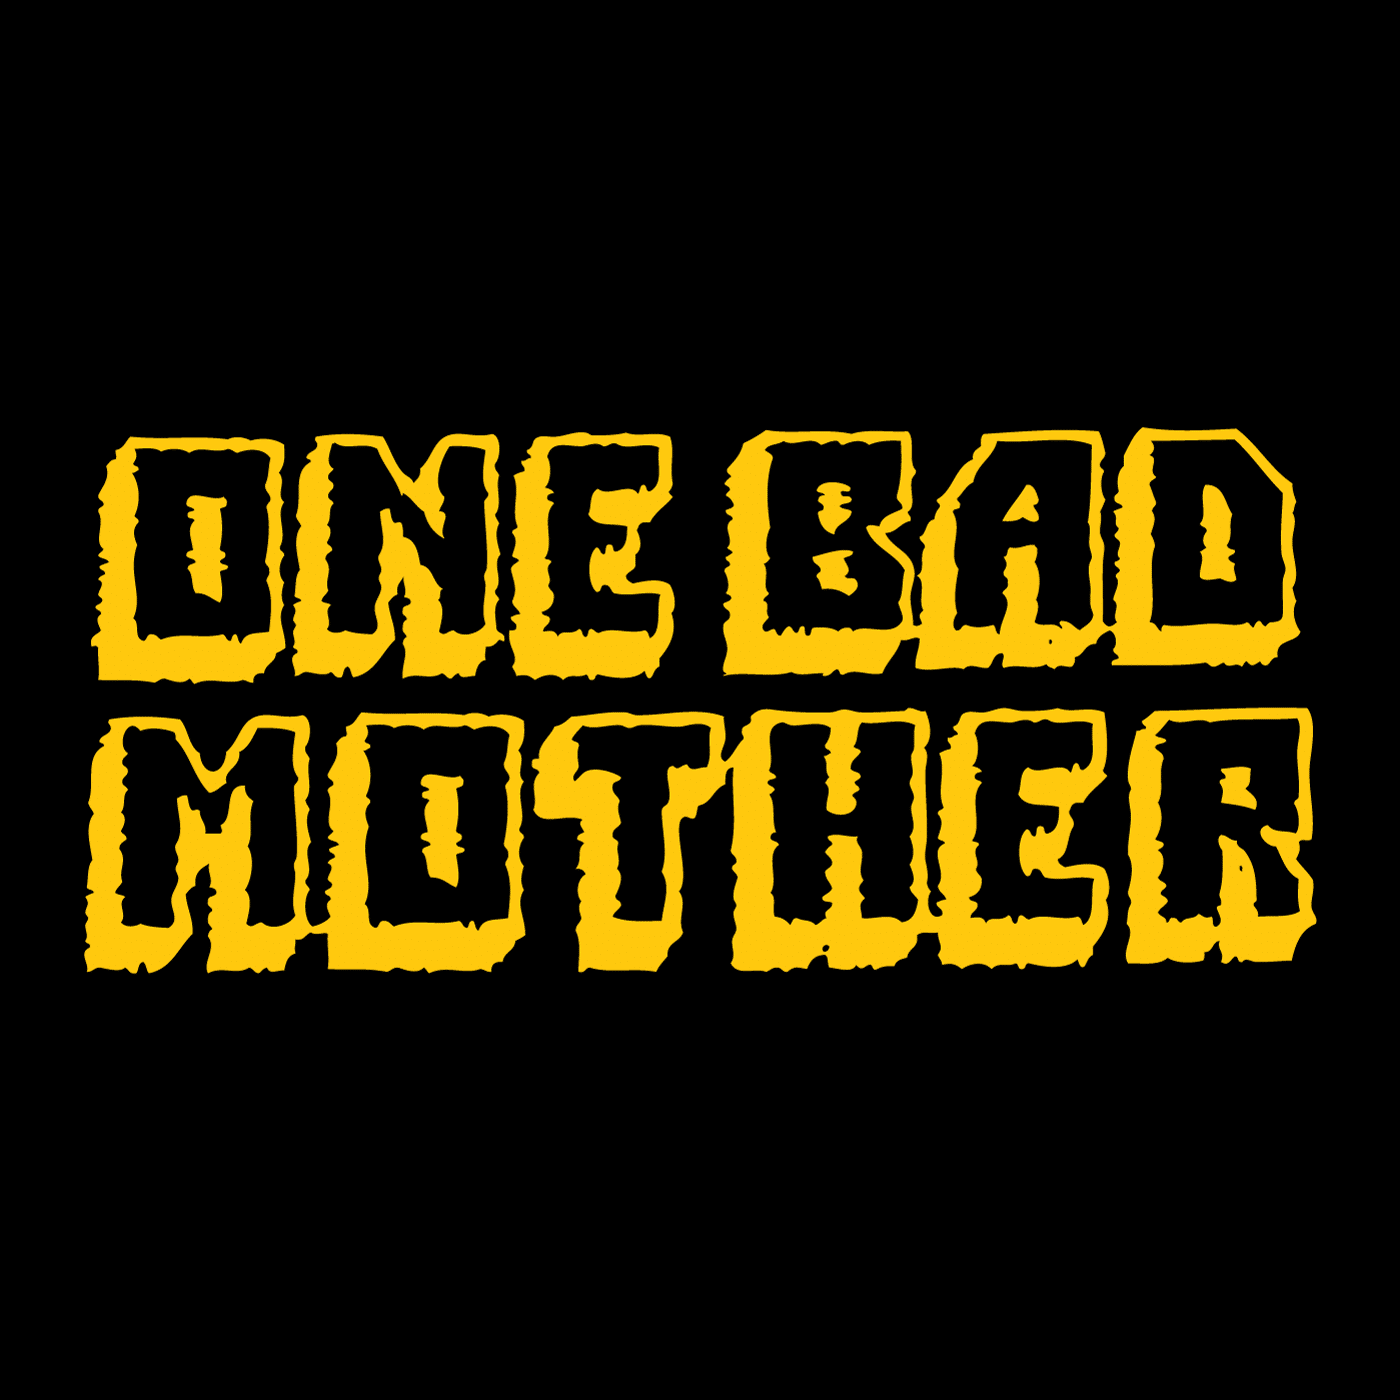 One Bad Mother Logo